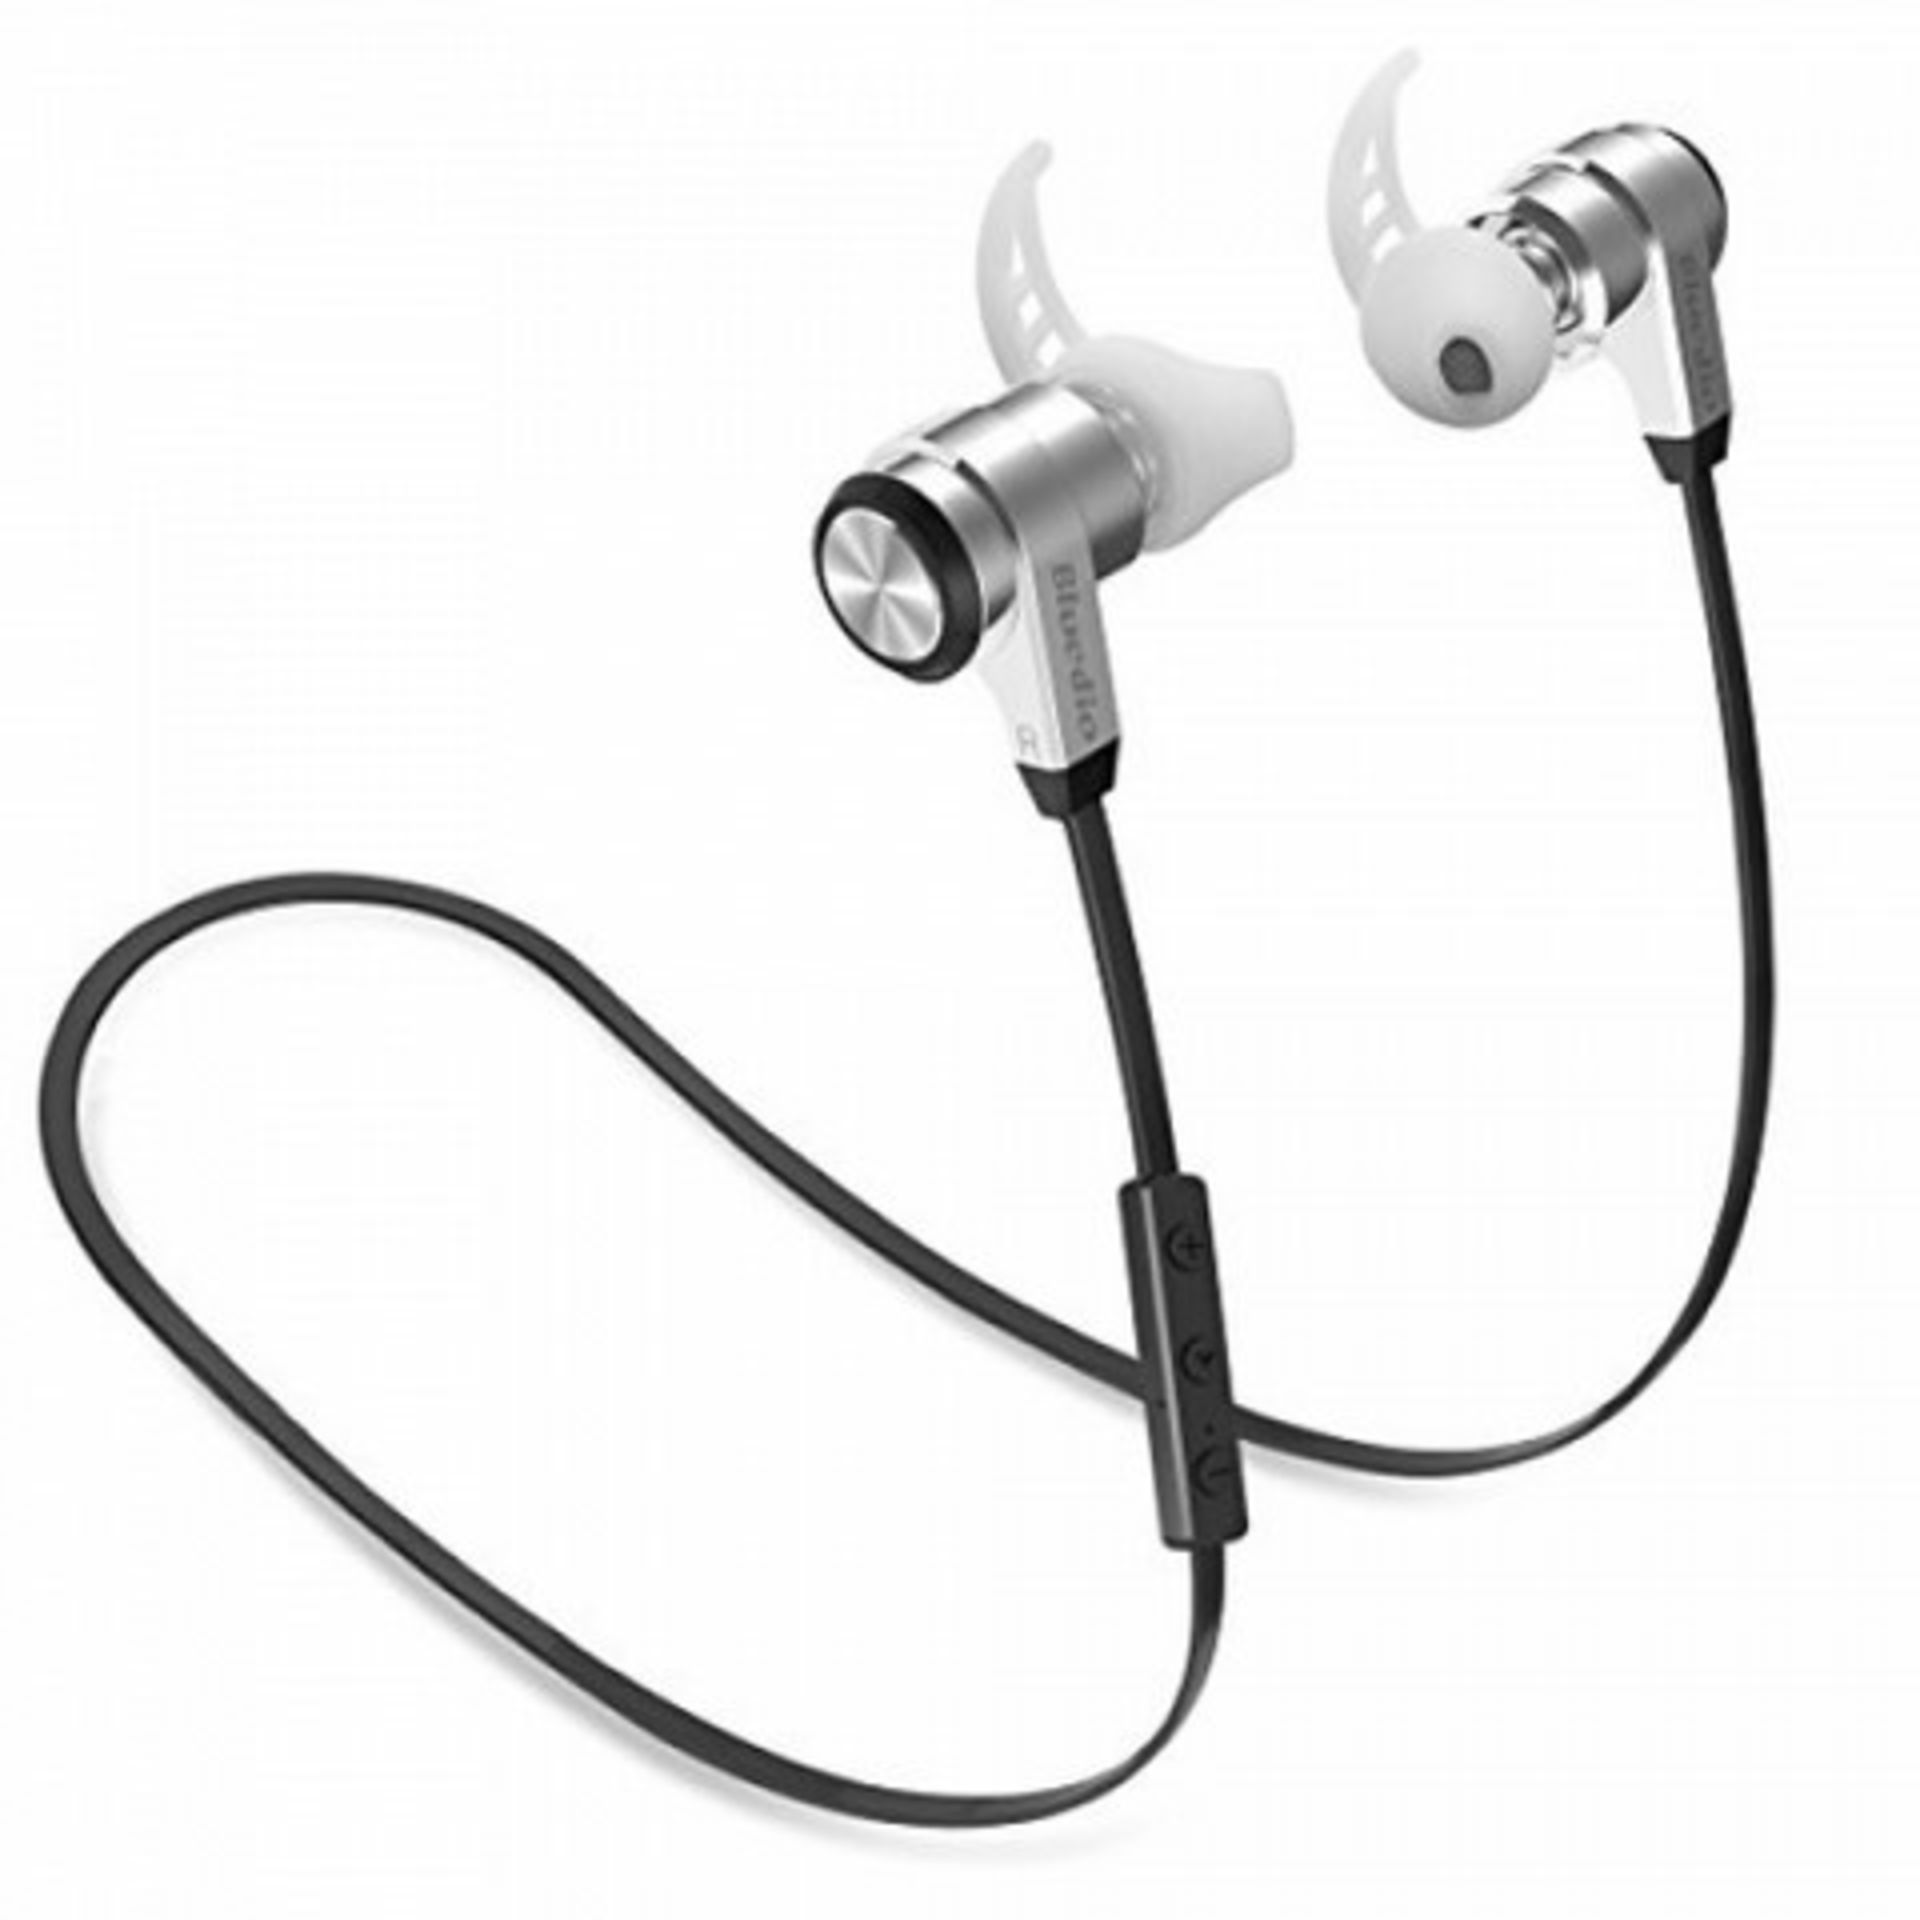 + VAT Grade U Pair of Bluetooth Earphones/Headset (All Boxed) - Colours and Styles/Makes May Vary - - Image 4 of 7